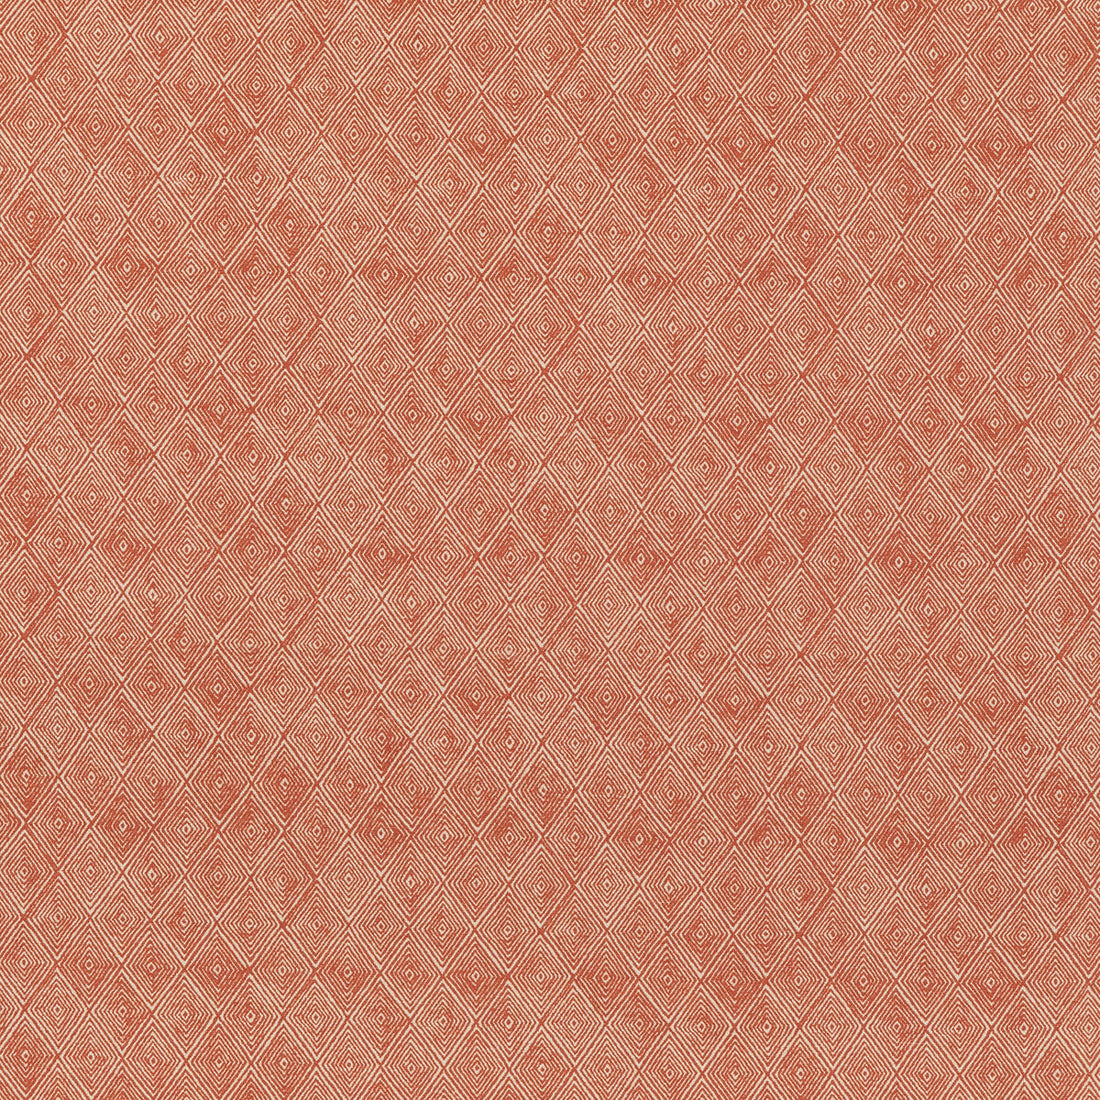 Boundary fabric in spice color - pattern ED75042.2.0 - by Threads in the Nala Prints collection